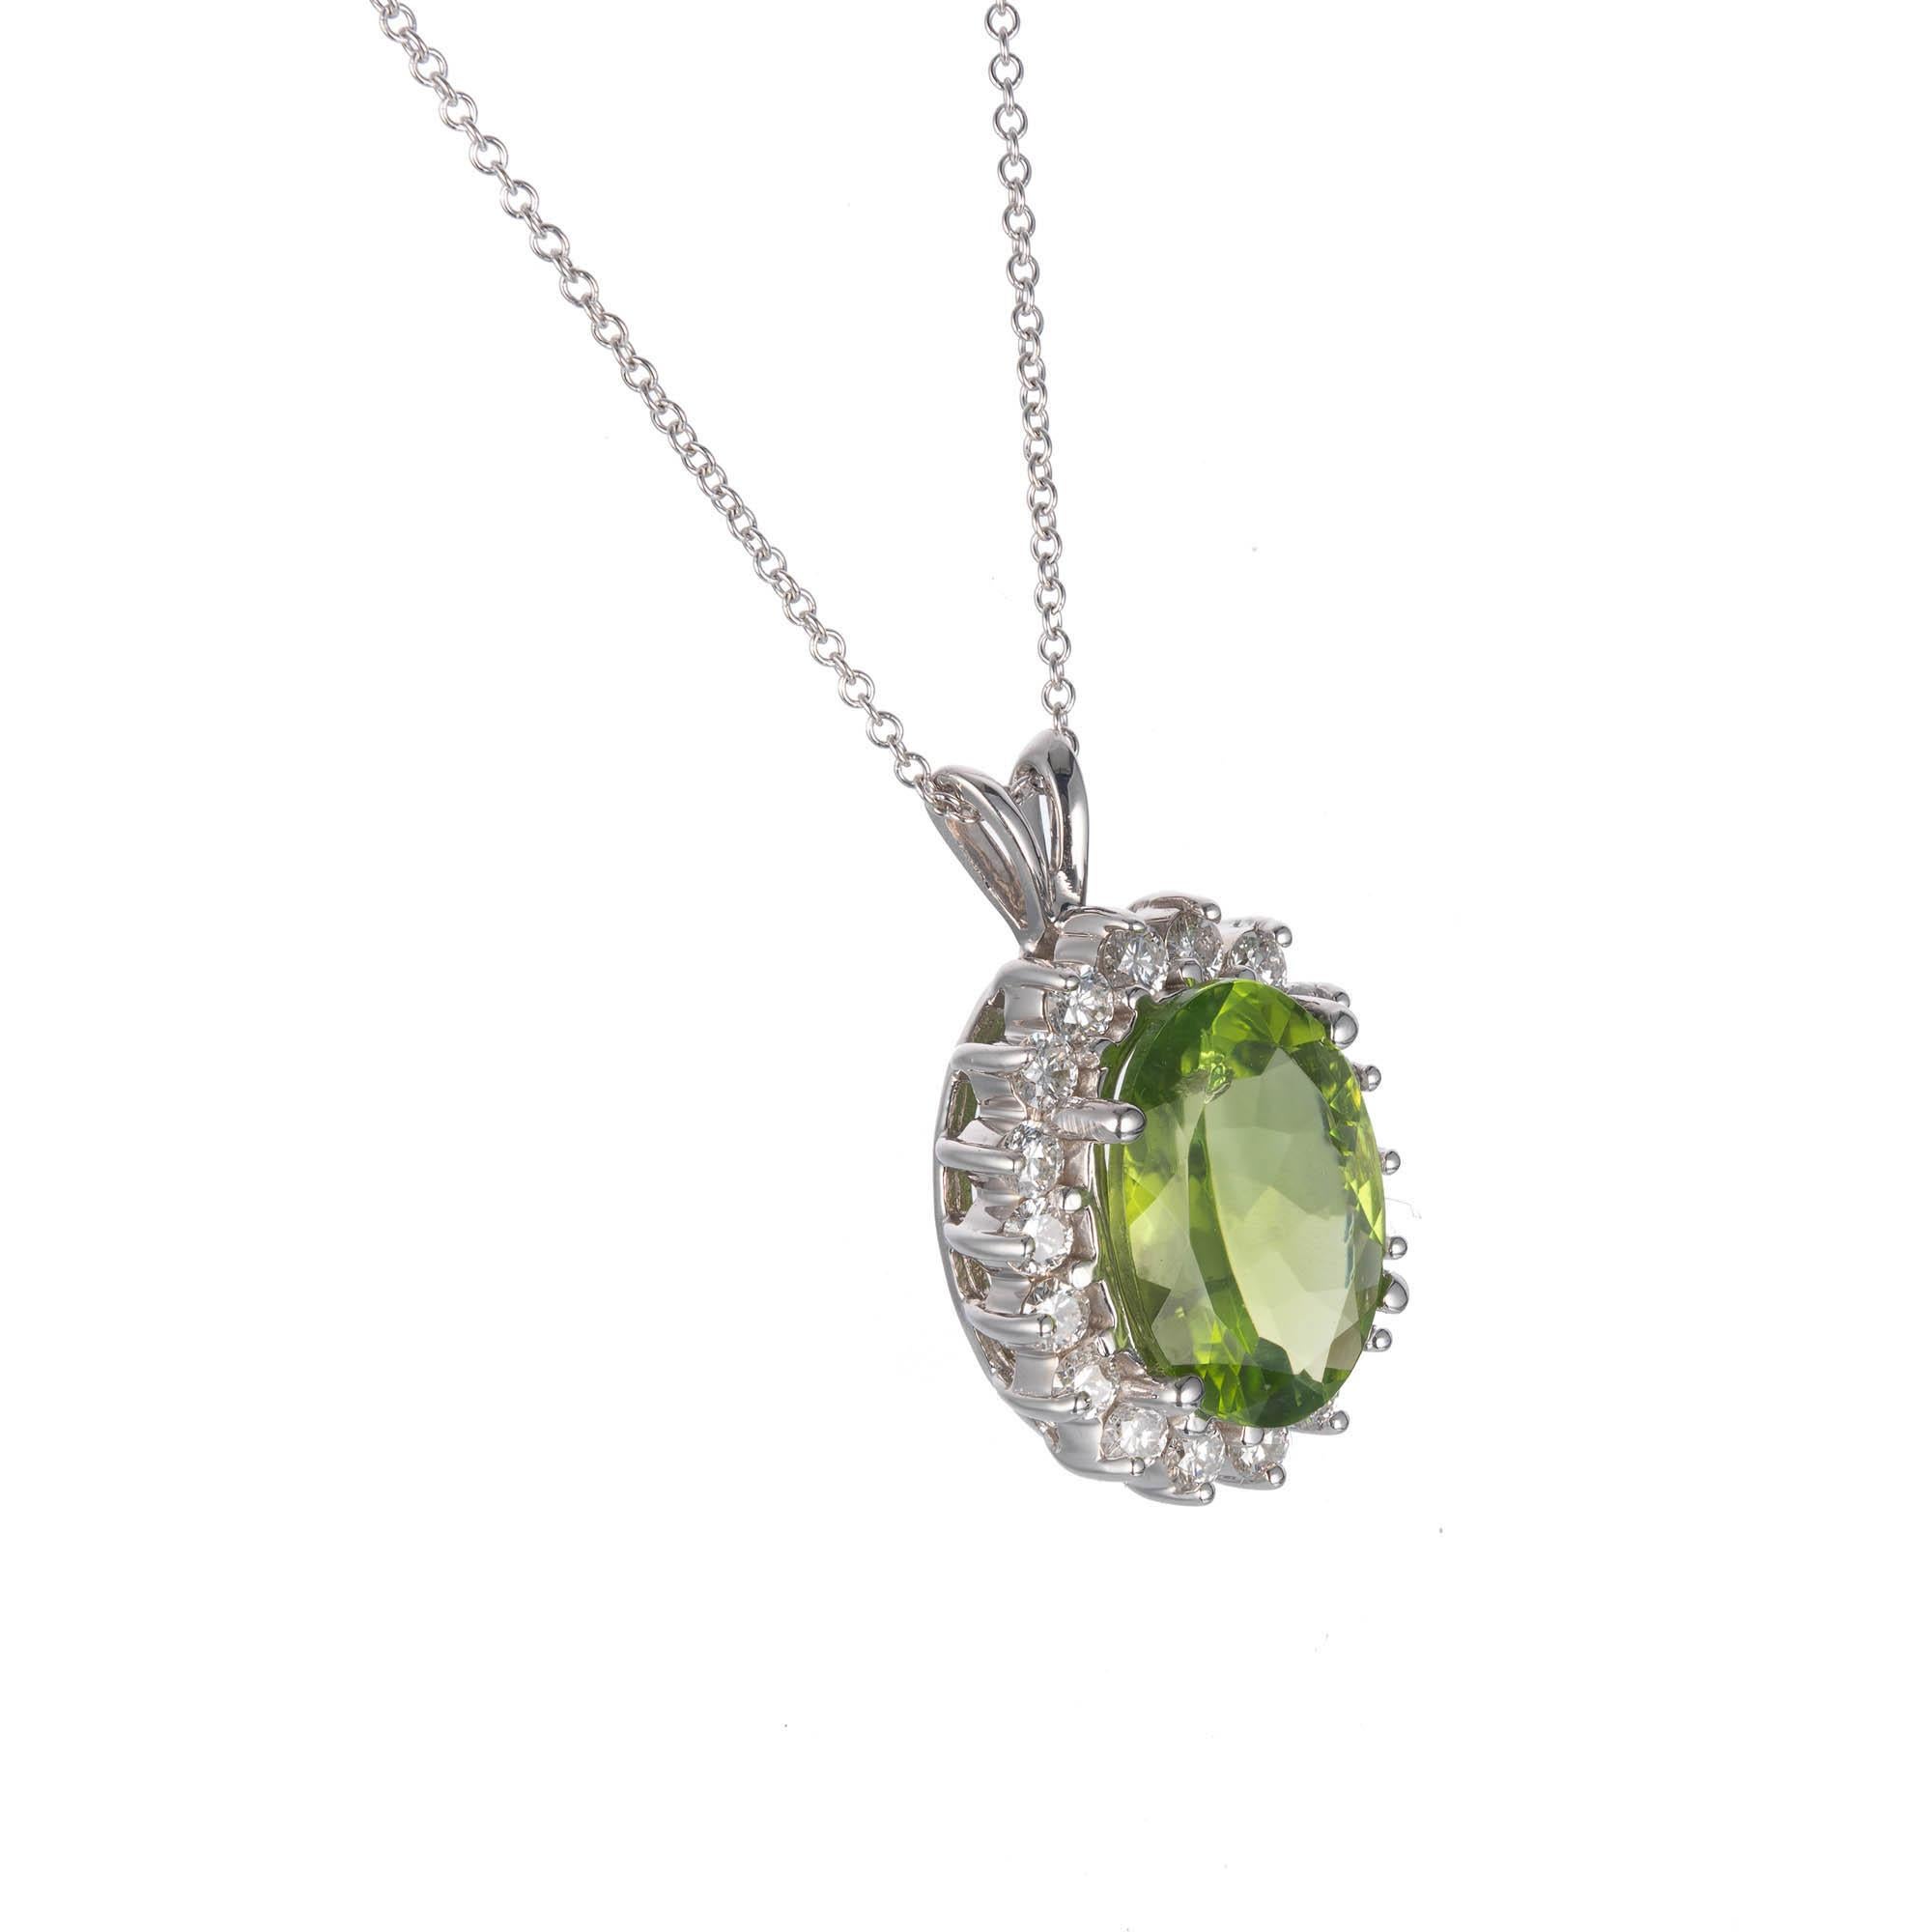 Oval bright green Peridot pendant with bright white diamond halo, on an 18 inch white gold chain. 

1 13.8 x 10mm oval bright green Peridot, approx. total weight 3.50cts,
18 round full cut diamonds, approx. total weight .90cts, G-H, SI1
14k White